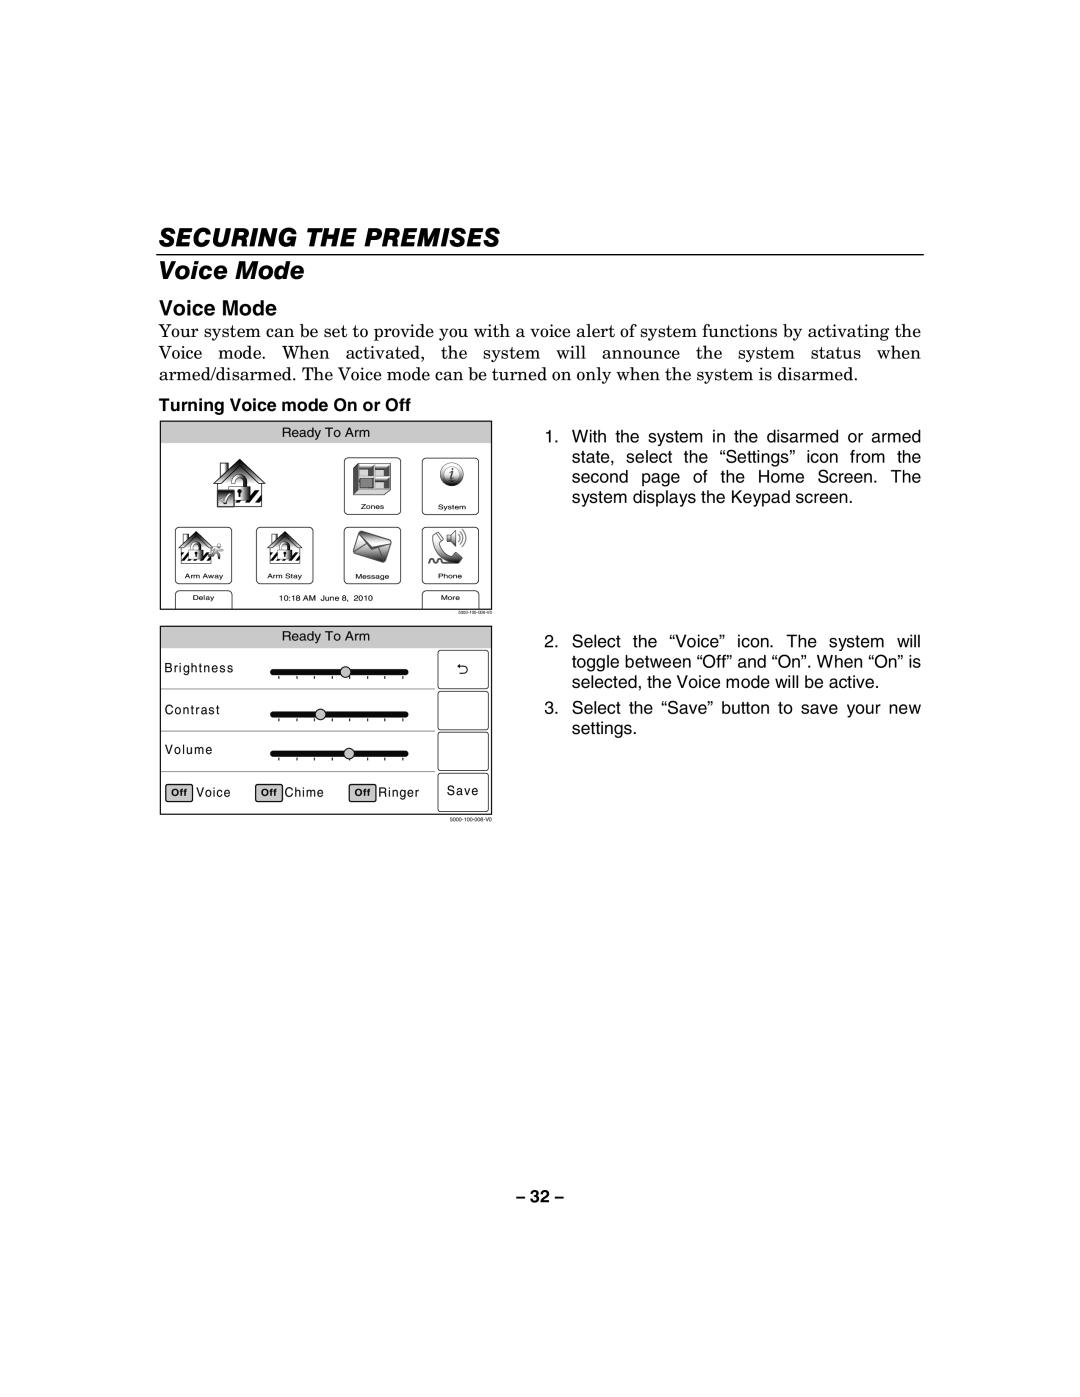 Honeywell 800-06894 manual SECURING THE PREMISES Voice Mode, Turning Voice mode On or Off 